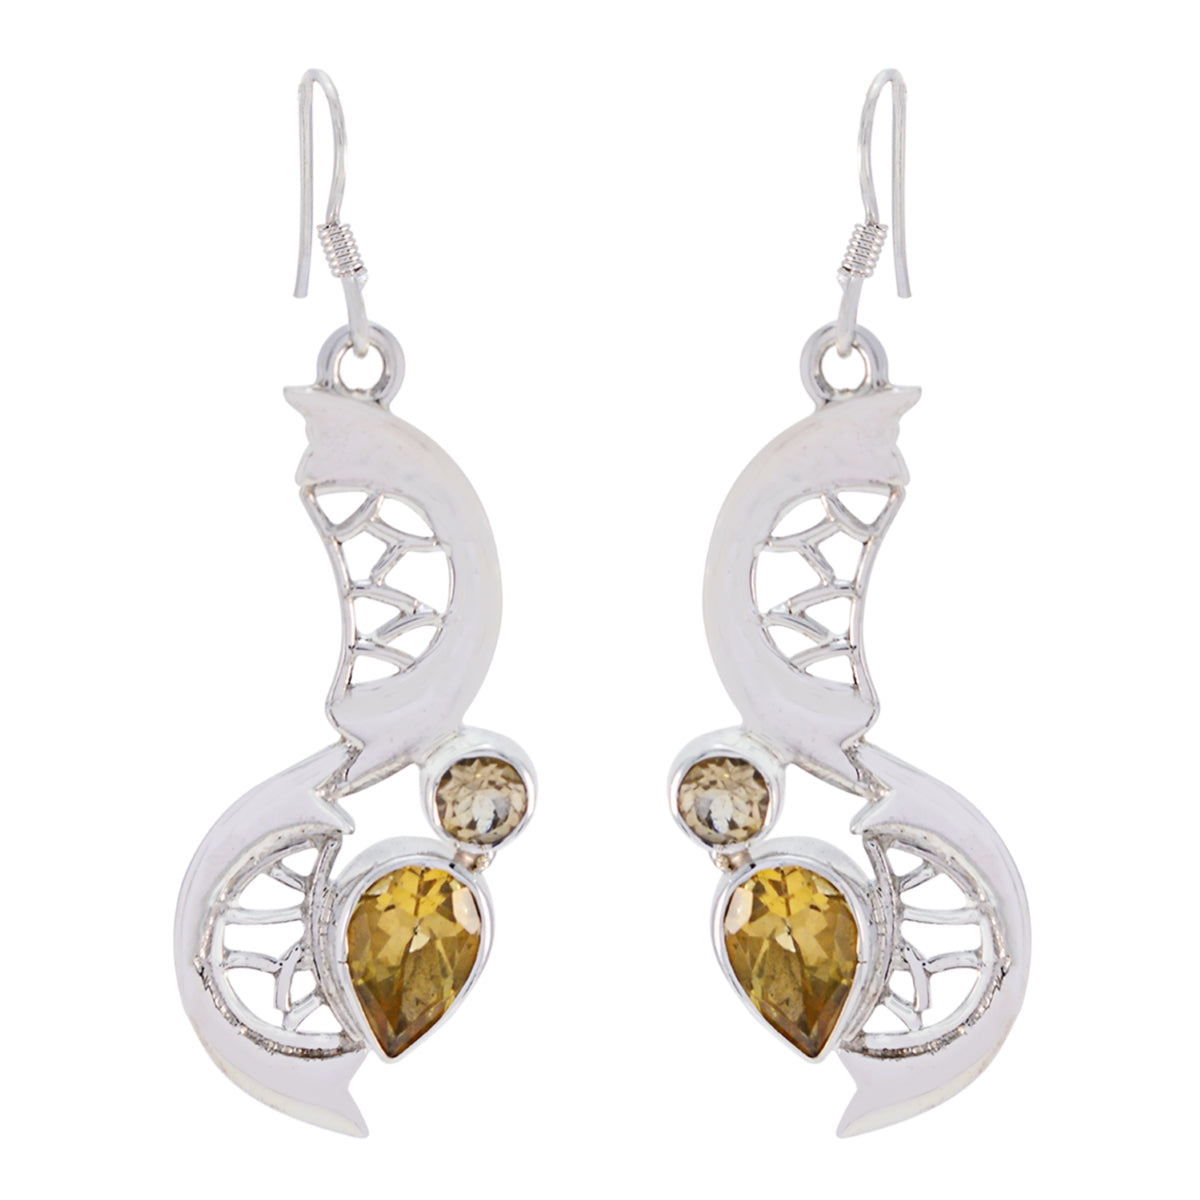 Riyo Good Gemstones multi shape Faceted Yellow Citrine Silver Earring gift for independence day